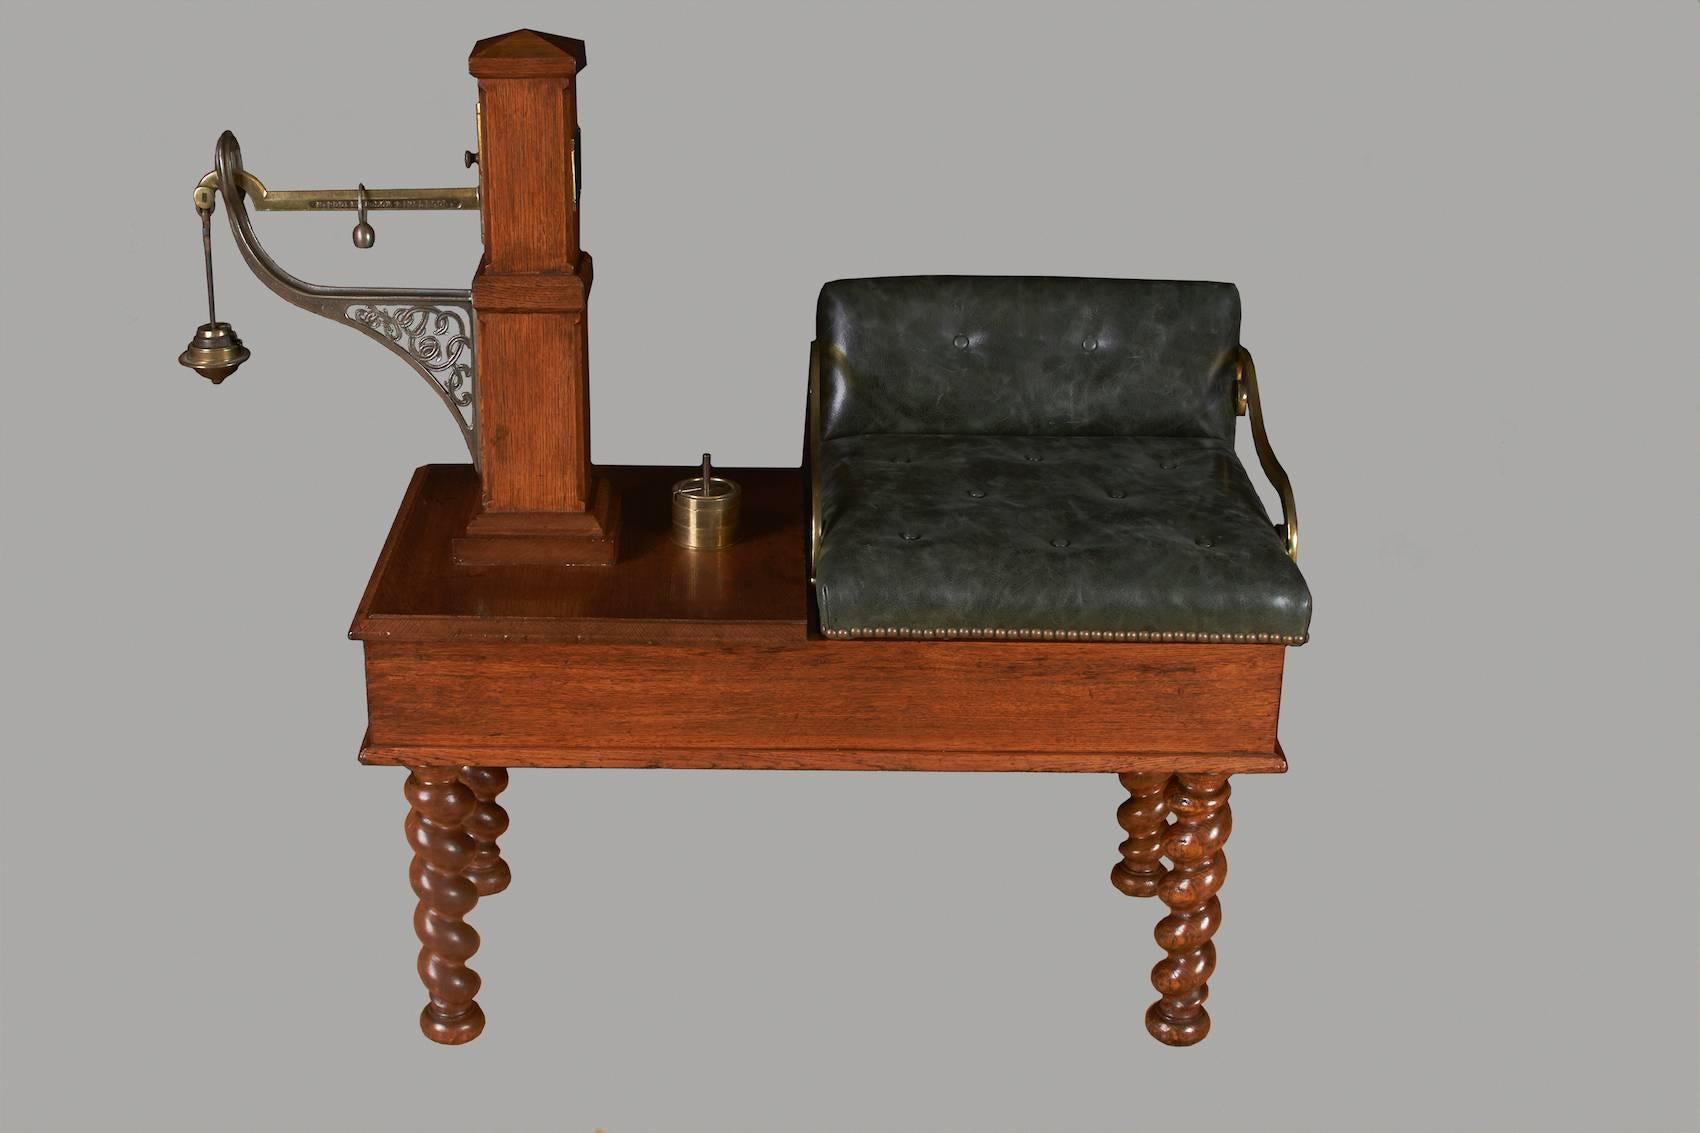 A rare oak and brass jockey scale made and signed by H.Pooley & Sons, London and Liverpool, the oak platform with a calibrated weight standard, brass signed maker's name plate and upholstered seat with brass arms, supported on rope turned legs